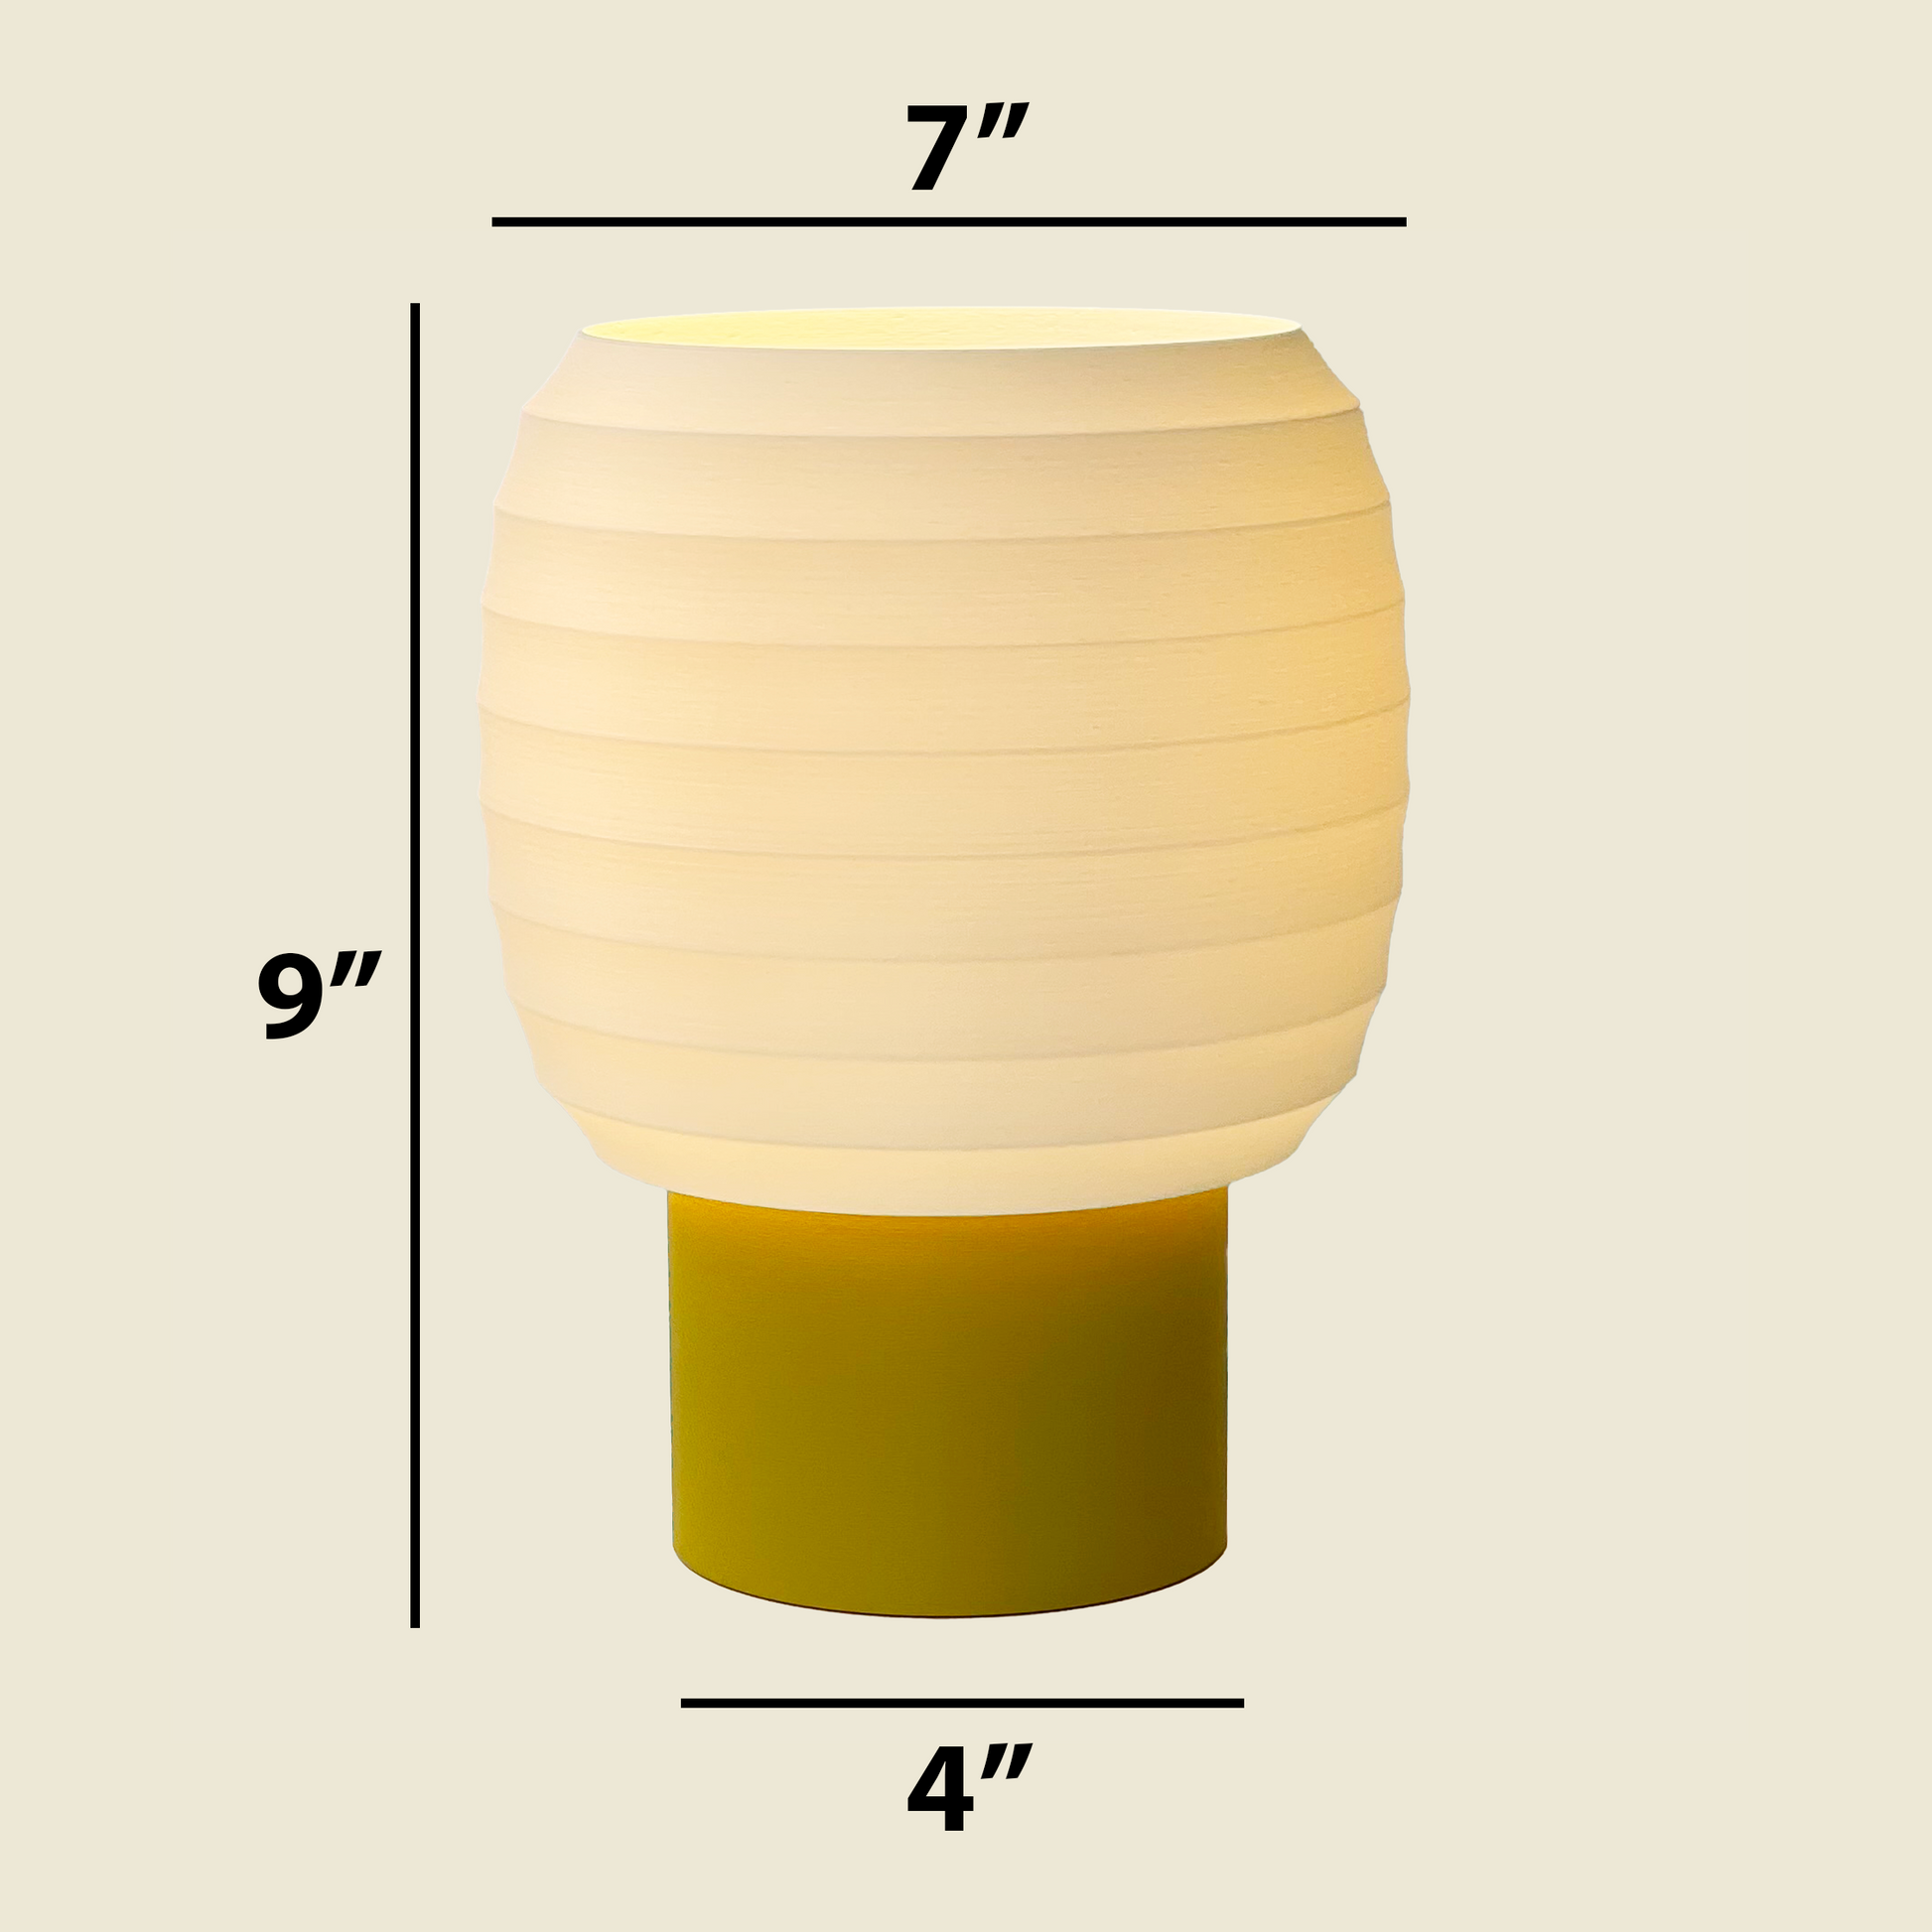 a yellow and green table lamp with measurements